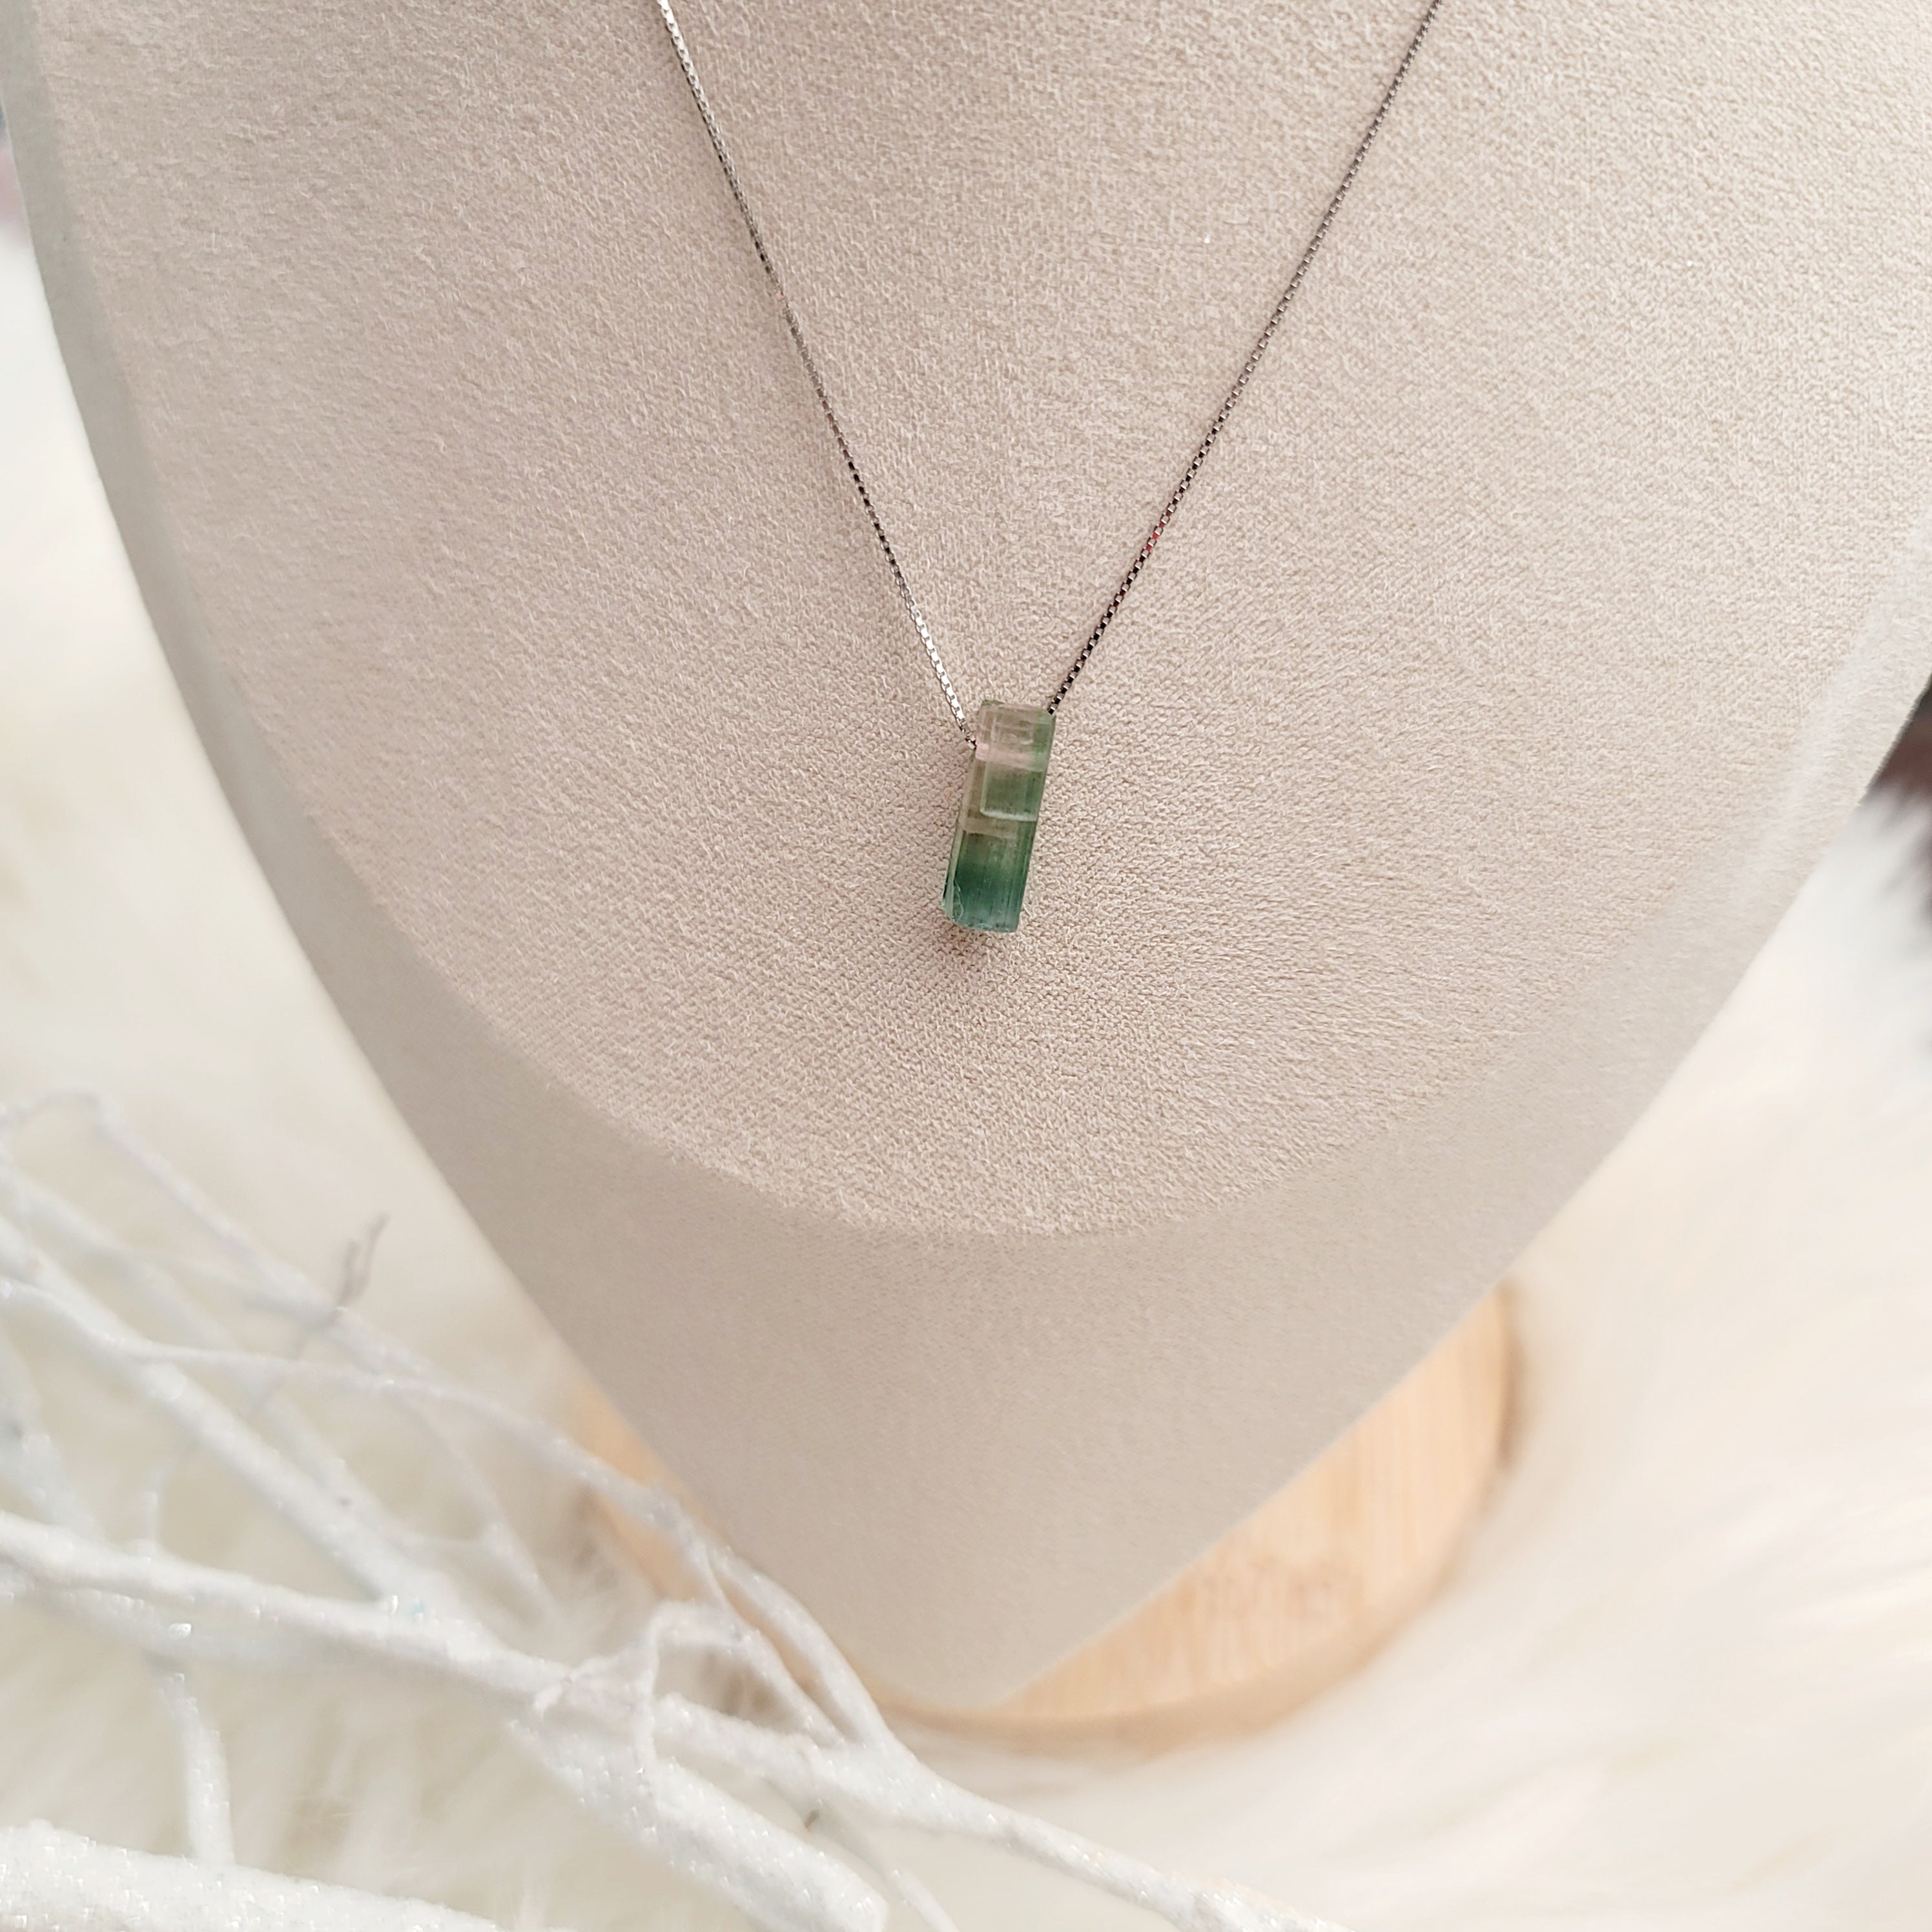 Cotton Candy Tourmaline Pendant for Emotional Healing, Joy and Manifesting Love